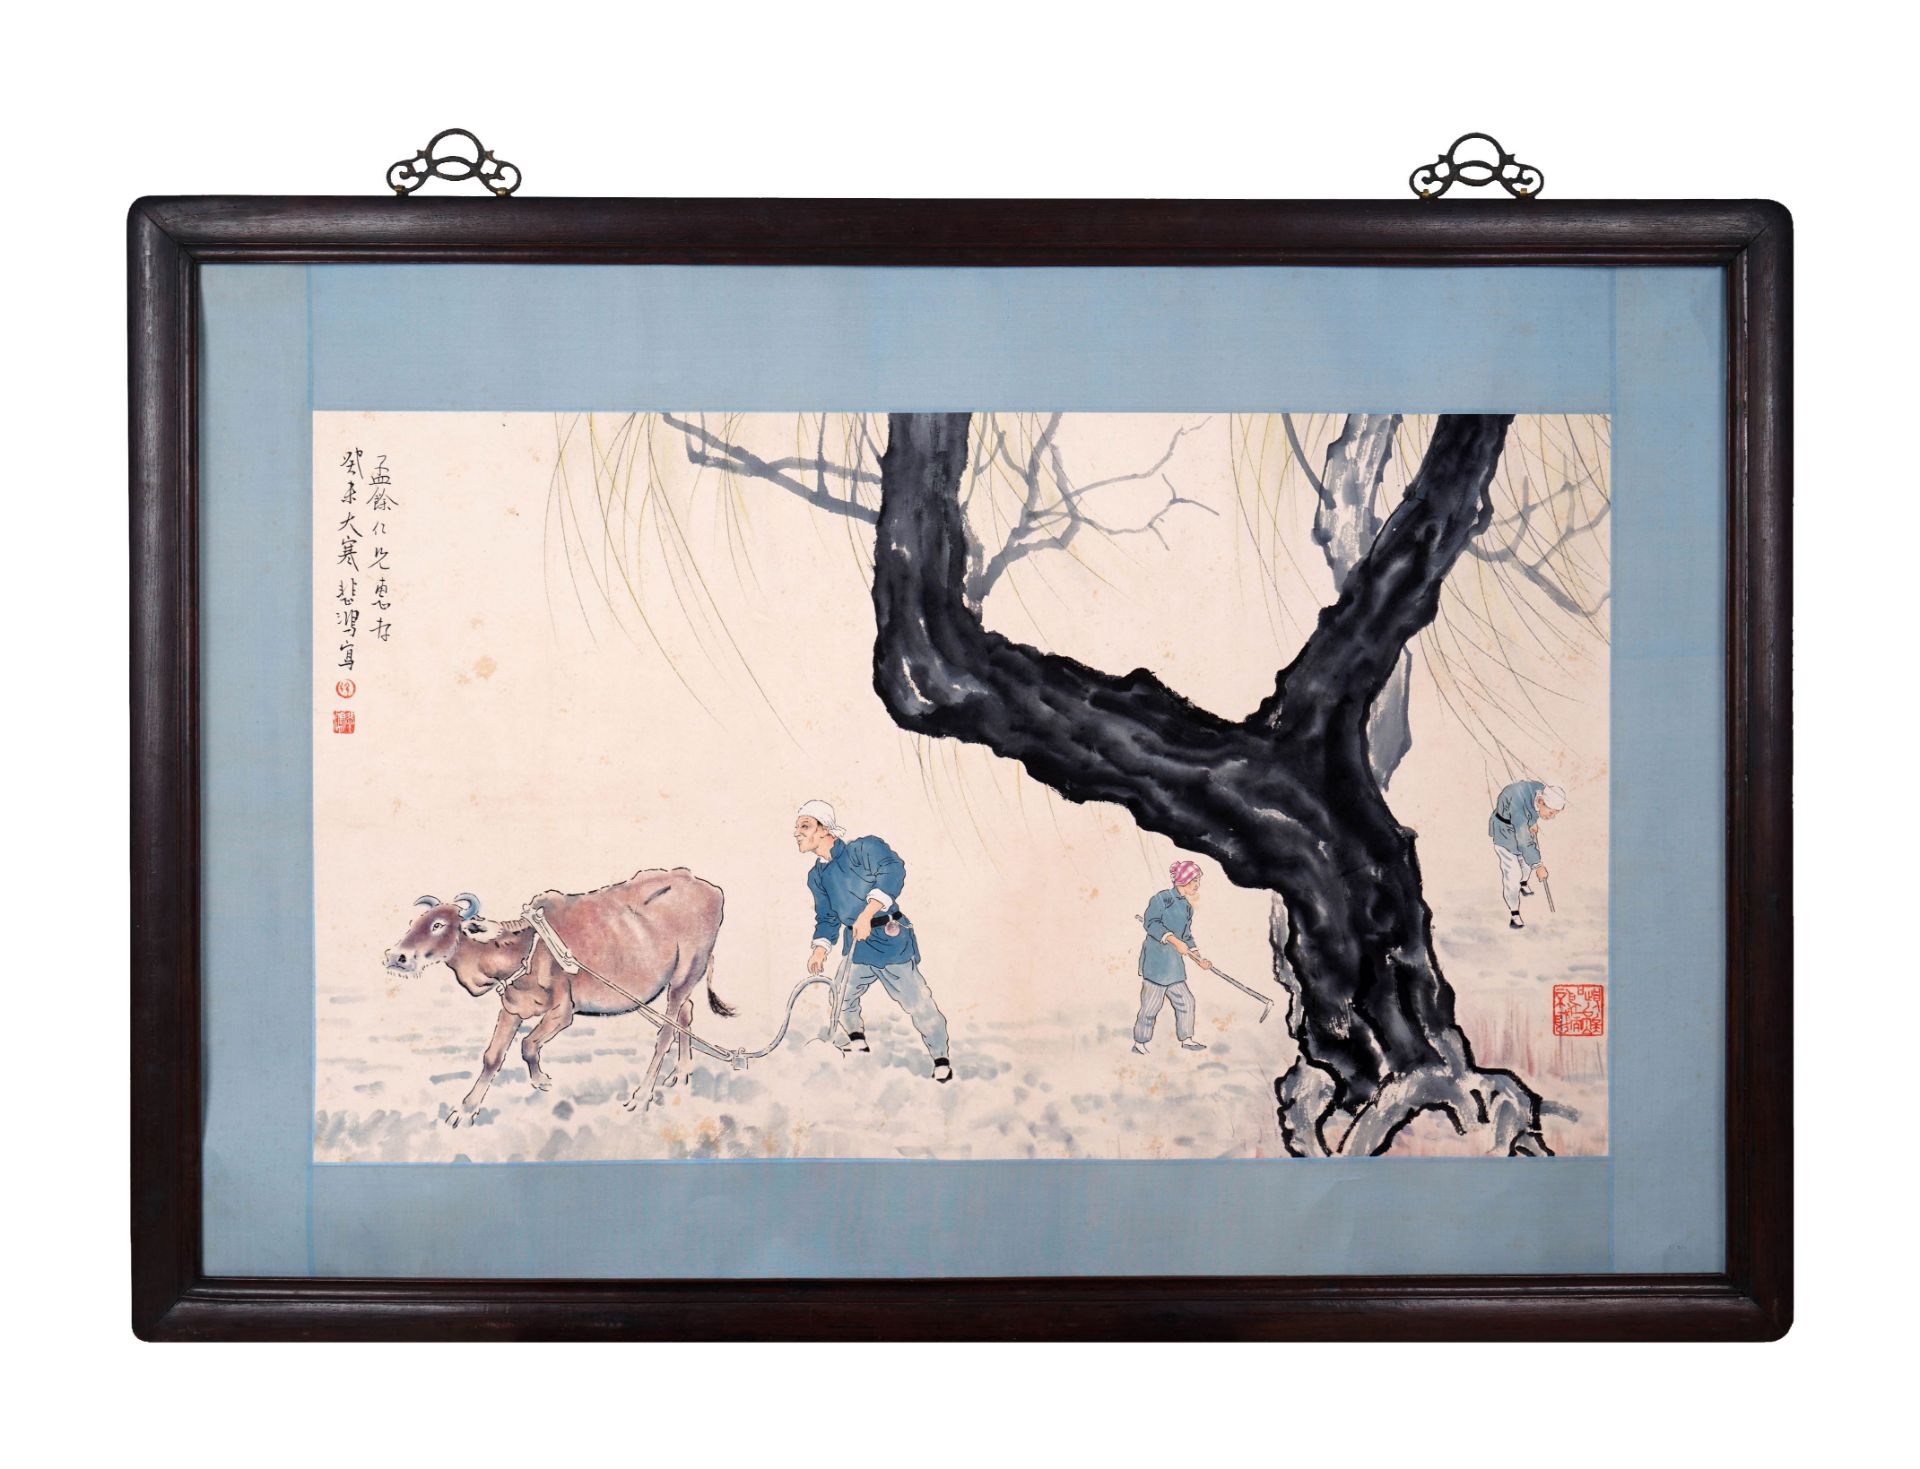 A Chinese Frame Painting By Xu Beihong - Image 2 of 16